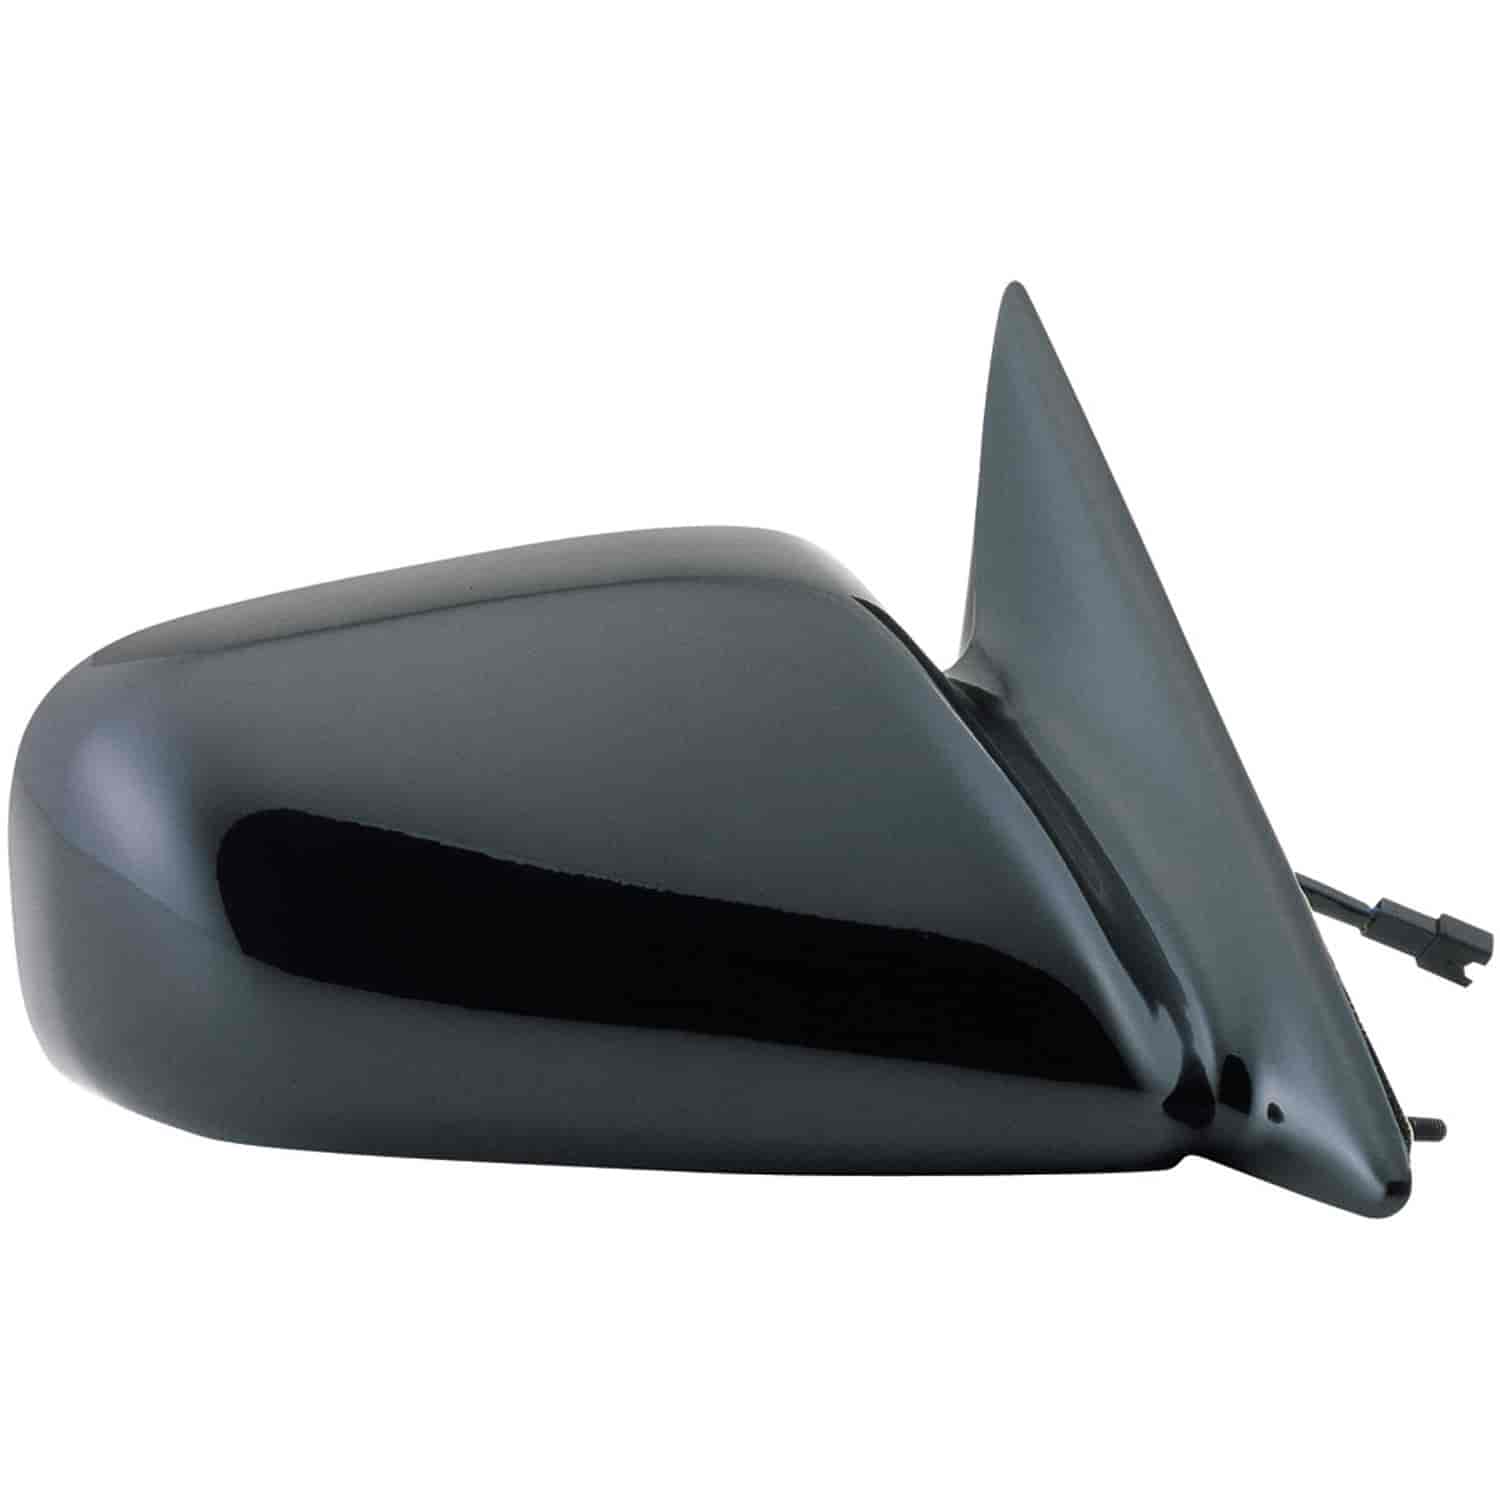 OEM Style Replacement mirror for 97-01 Toyota Camry Japan built passenger side mirror tested to fit